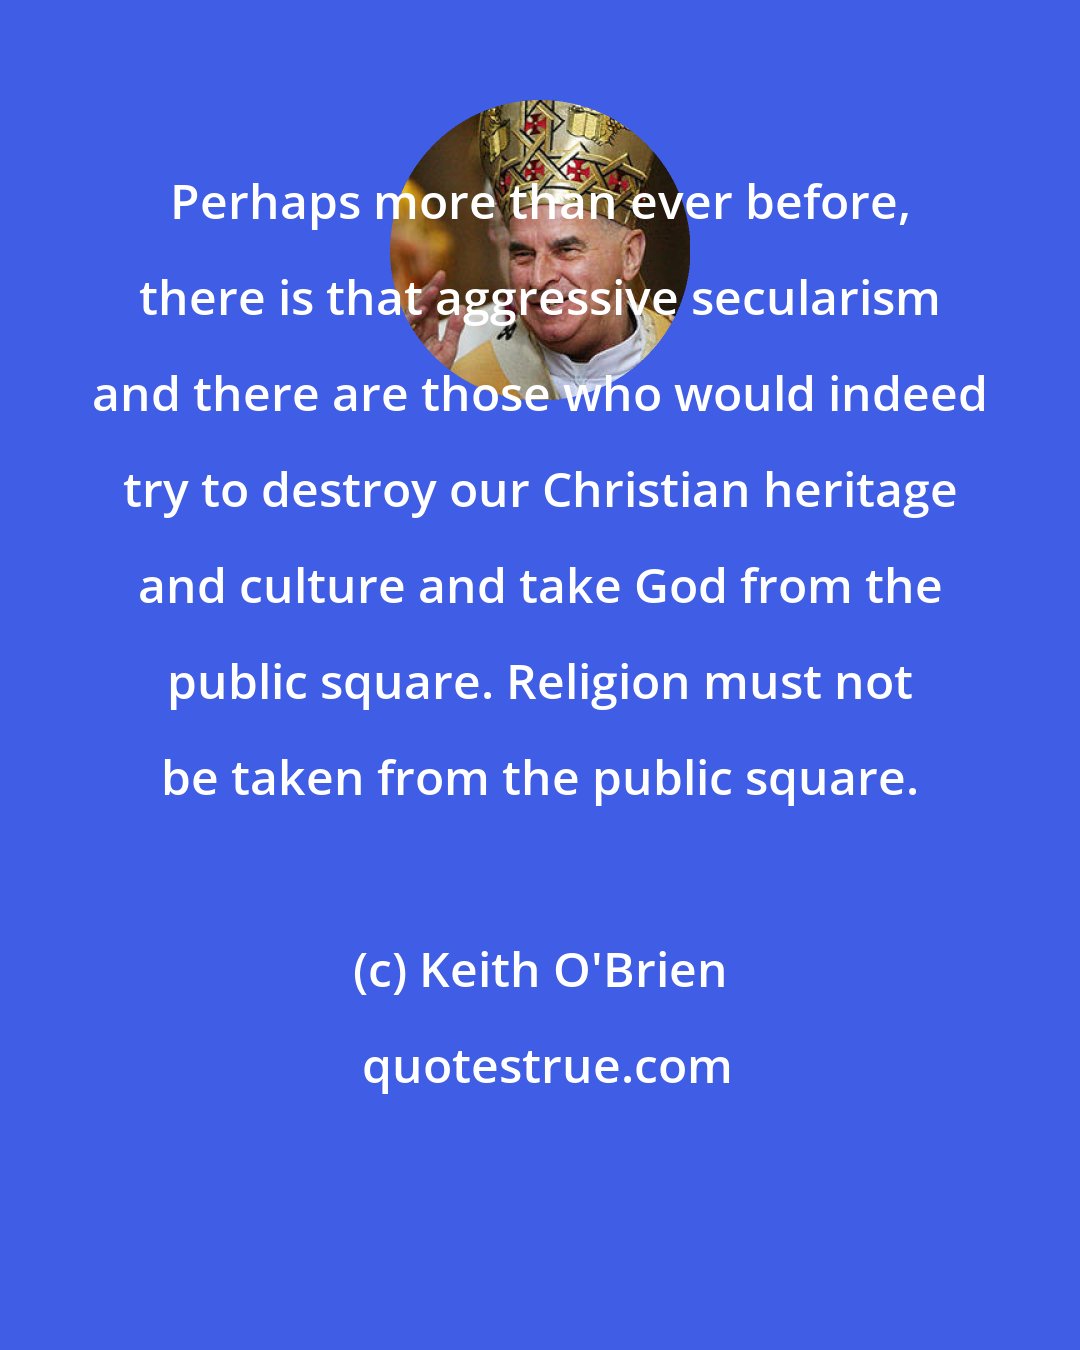 Keith O'Brien: Perhaps more than ever before, there is that aggressive secularism and there are those who would indeed try to destroy our Christian heritage and culture and take God from the public square. Religion must not be taken from the public square.